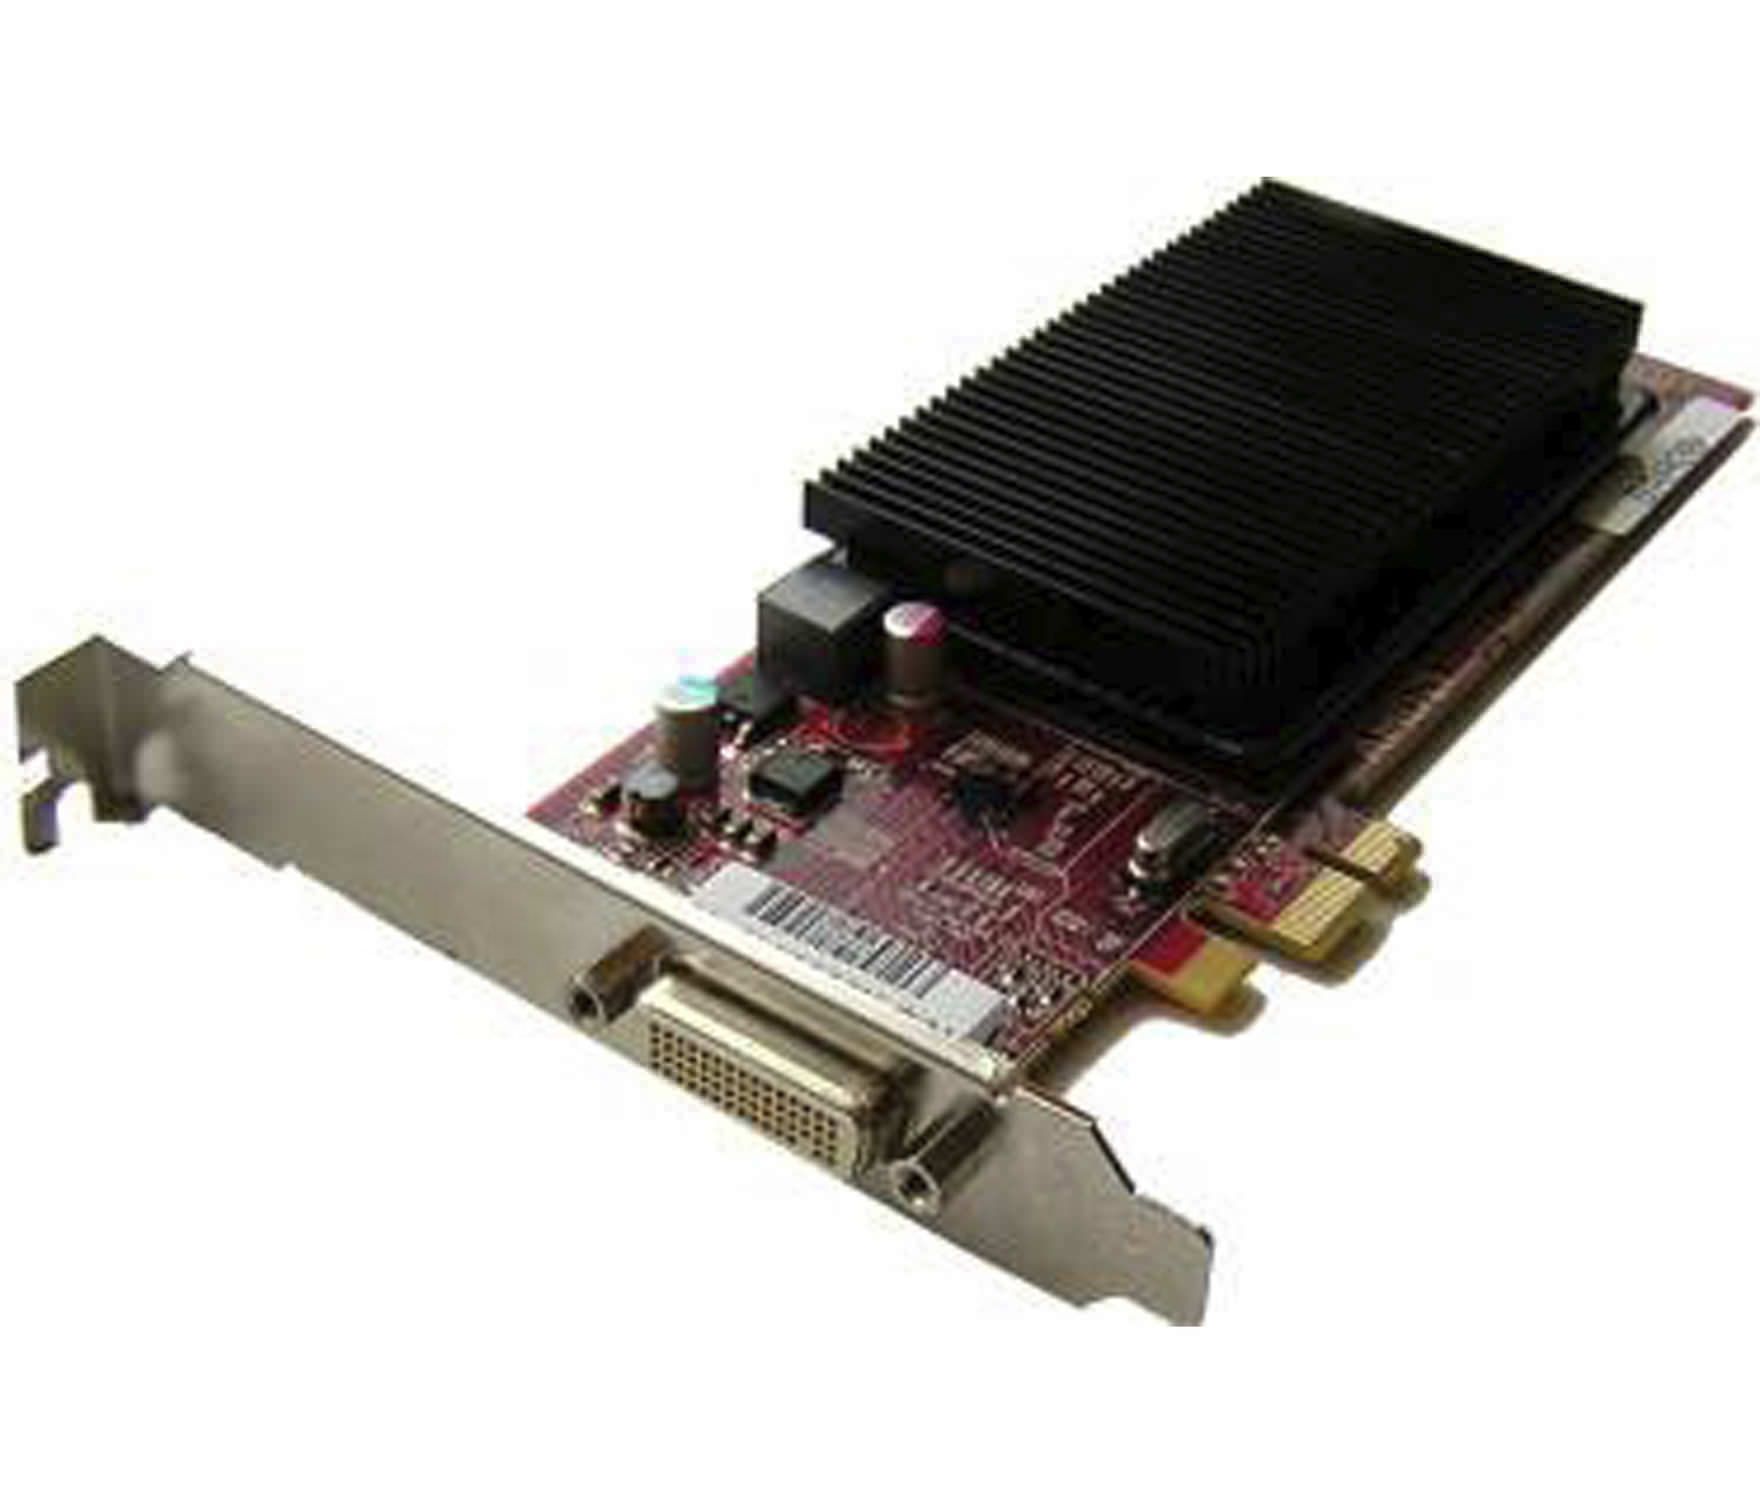 Digital graphic card (for medical imaging, PCI express) MXRT-1450 Barco